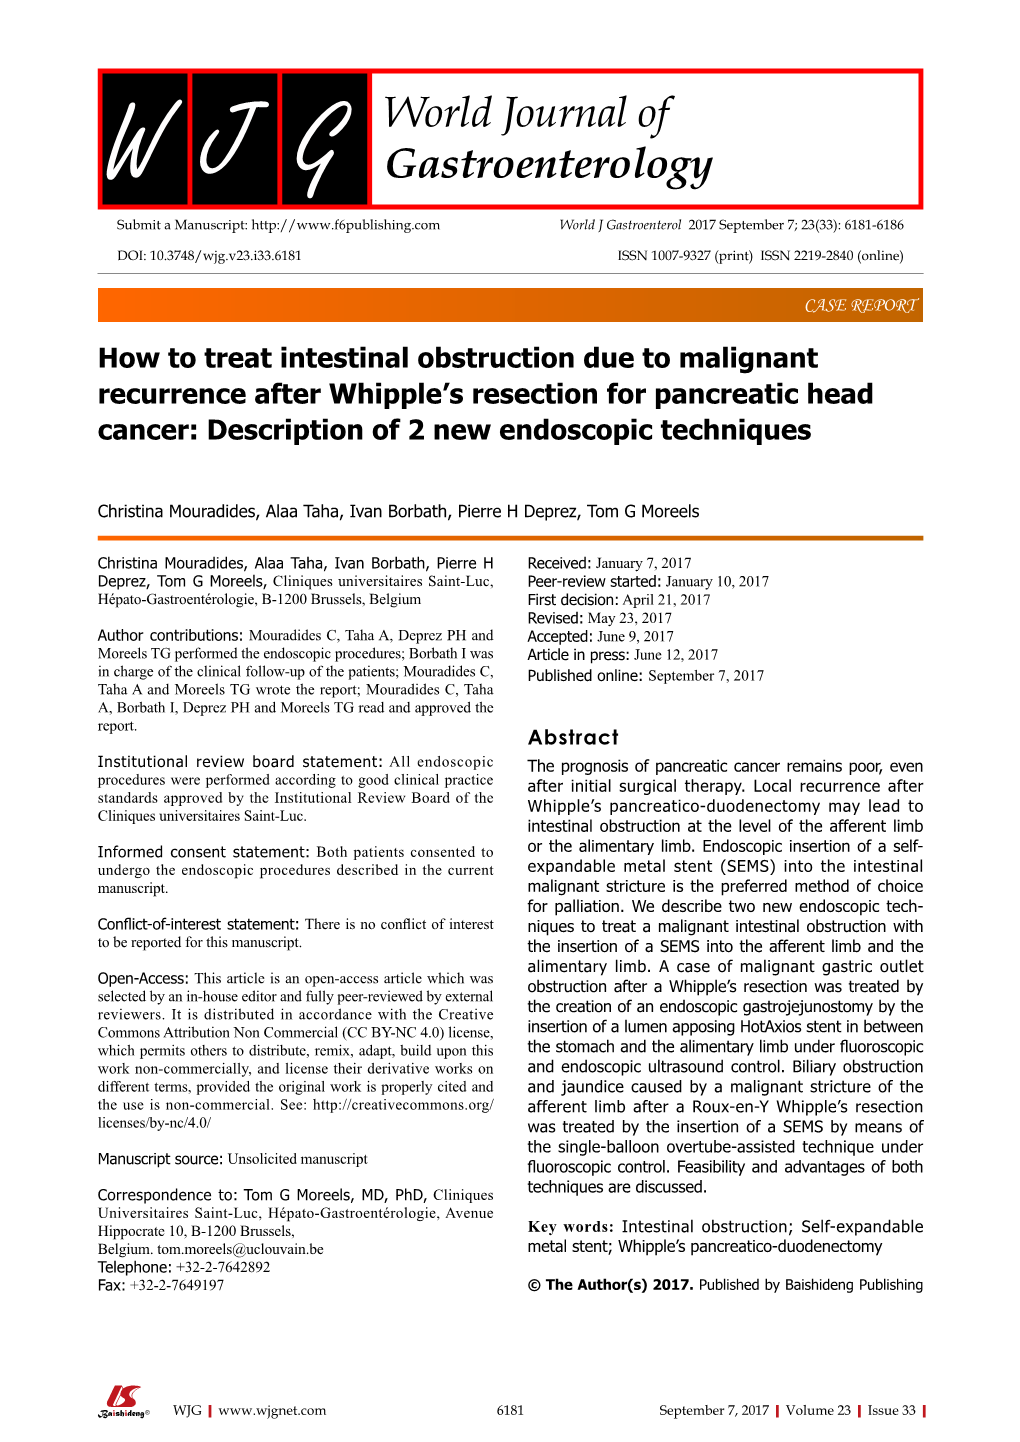 How to Treat Intestinal Obstruction Due to Malignant Recurrence After Whipple’S Resection for Pancreatic Head Cancer: Description of 2 New Endoscopic Techniques